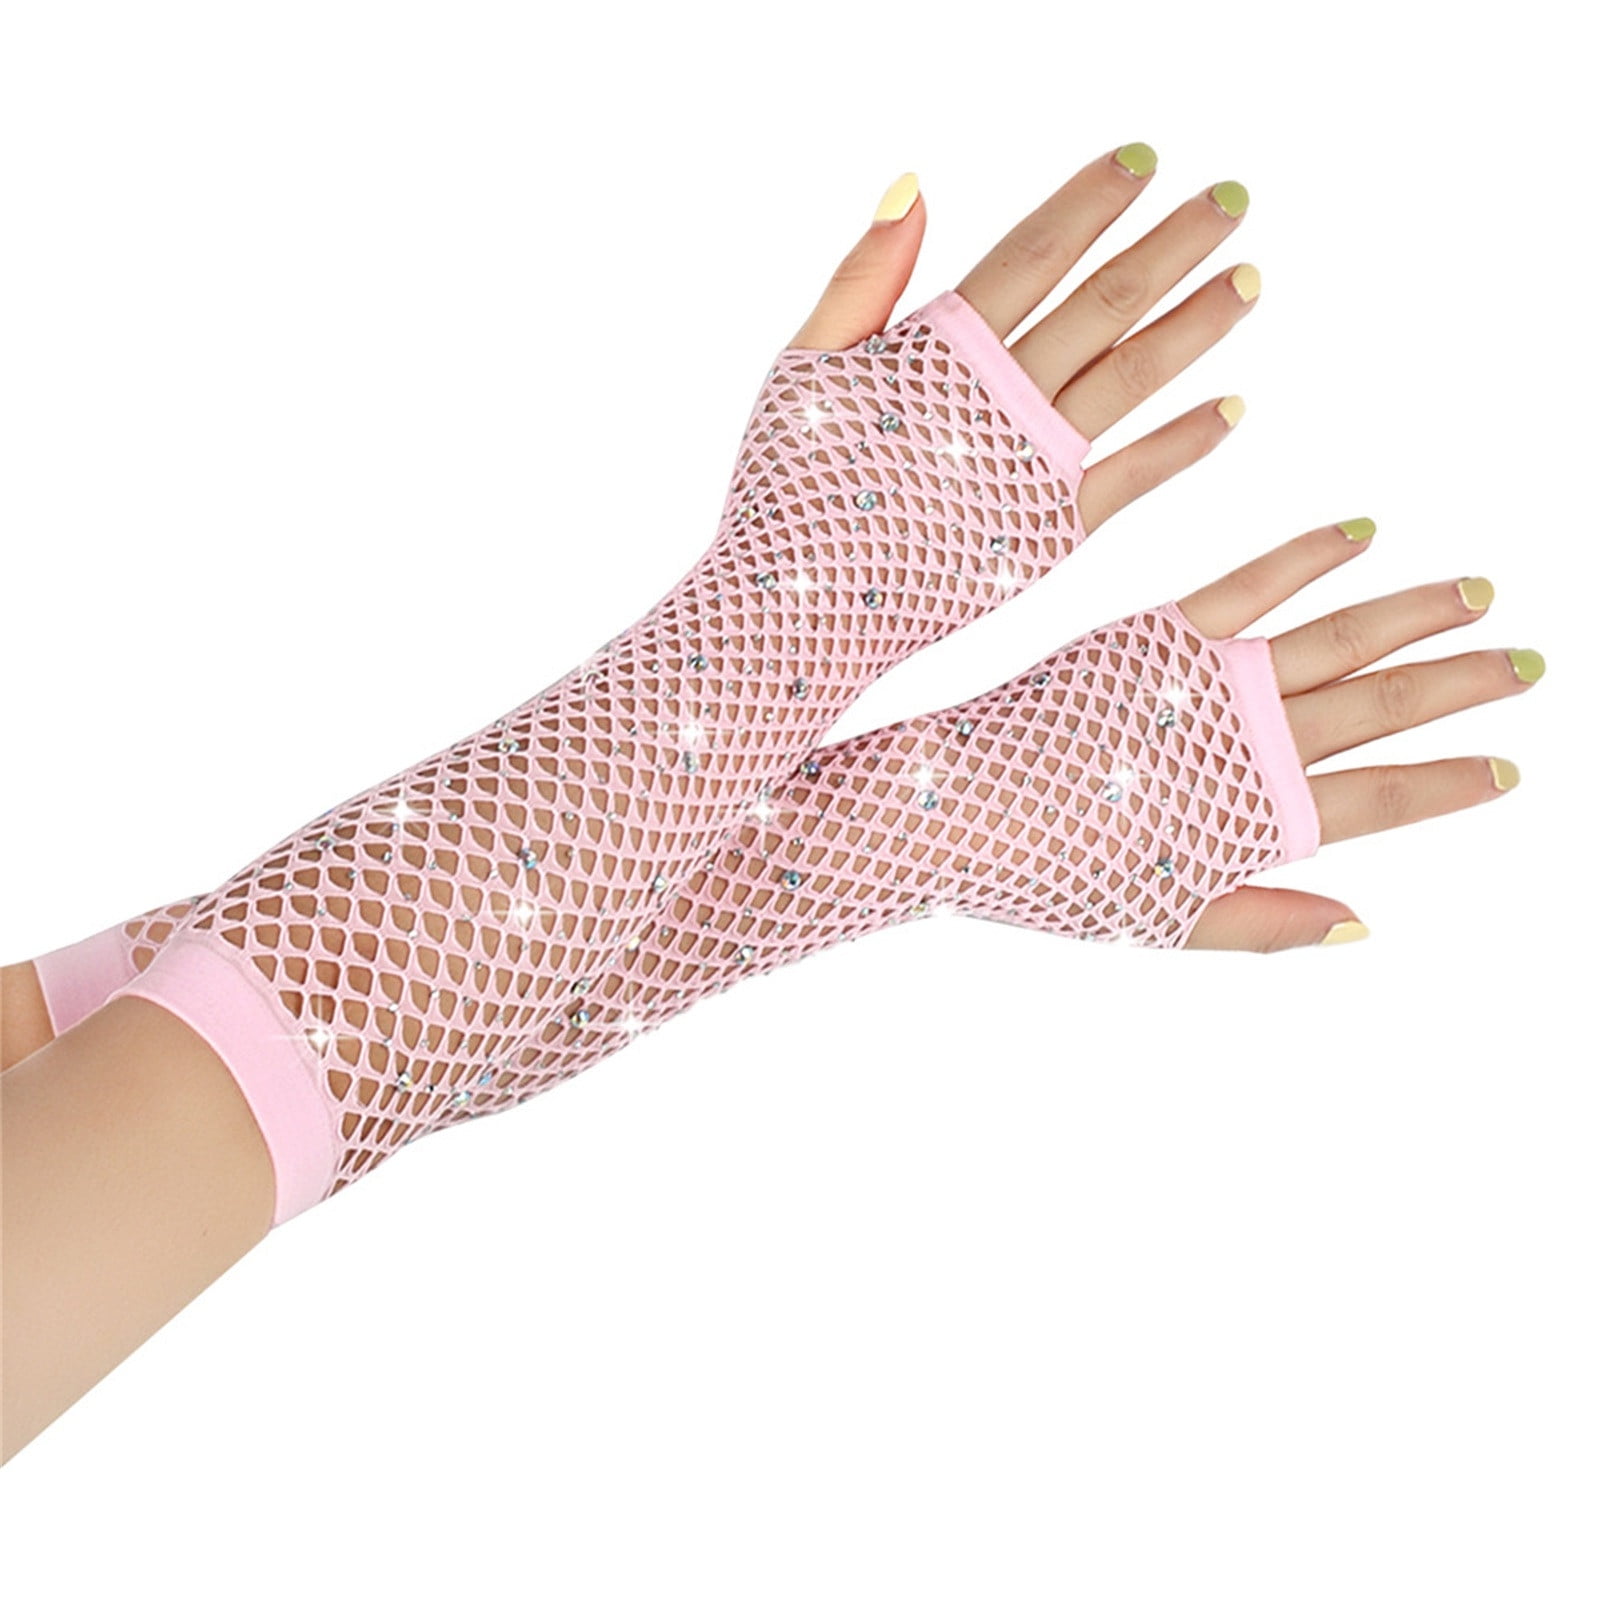 XMMSWDLA Fishnet Gloves Stretchy Fingerless 80s Party Accessories